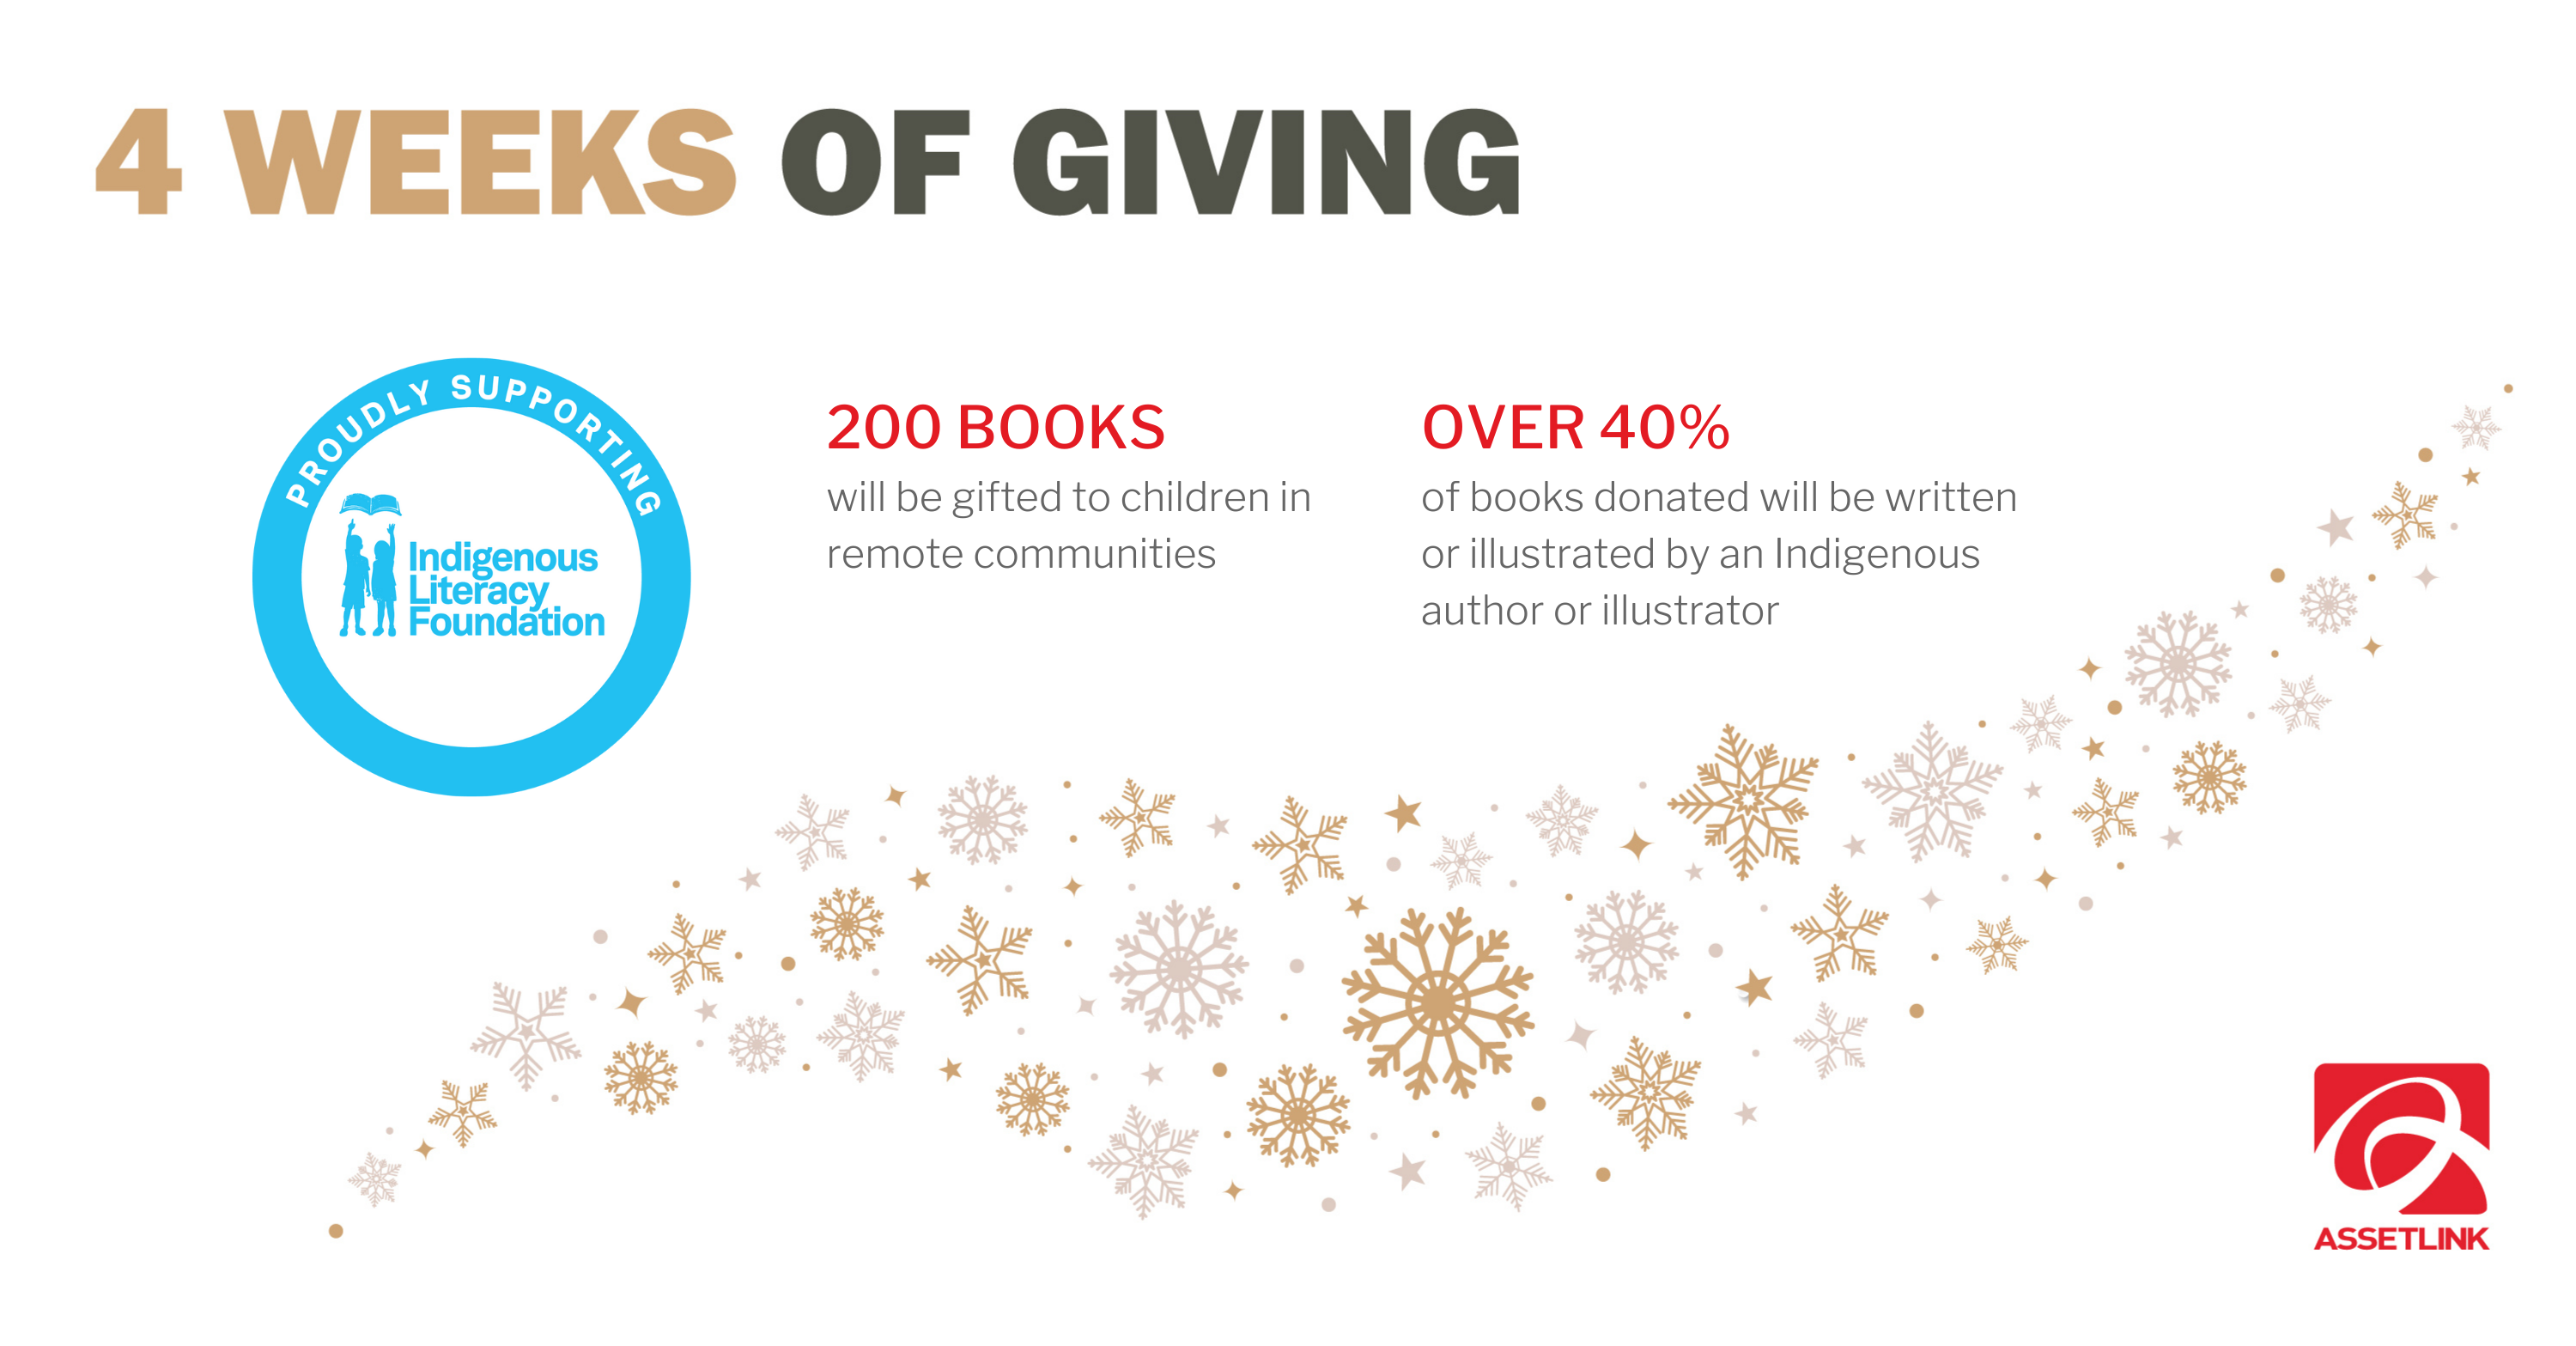 Assetlink 4 Weeks of Giving - Indigenous Literacy Foundation.png